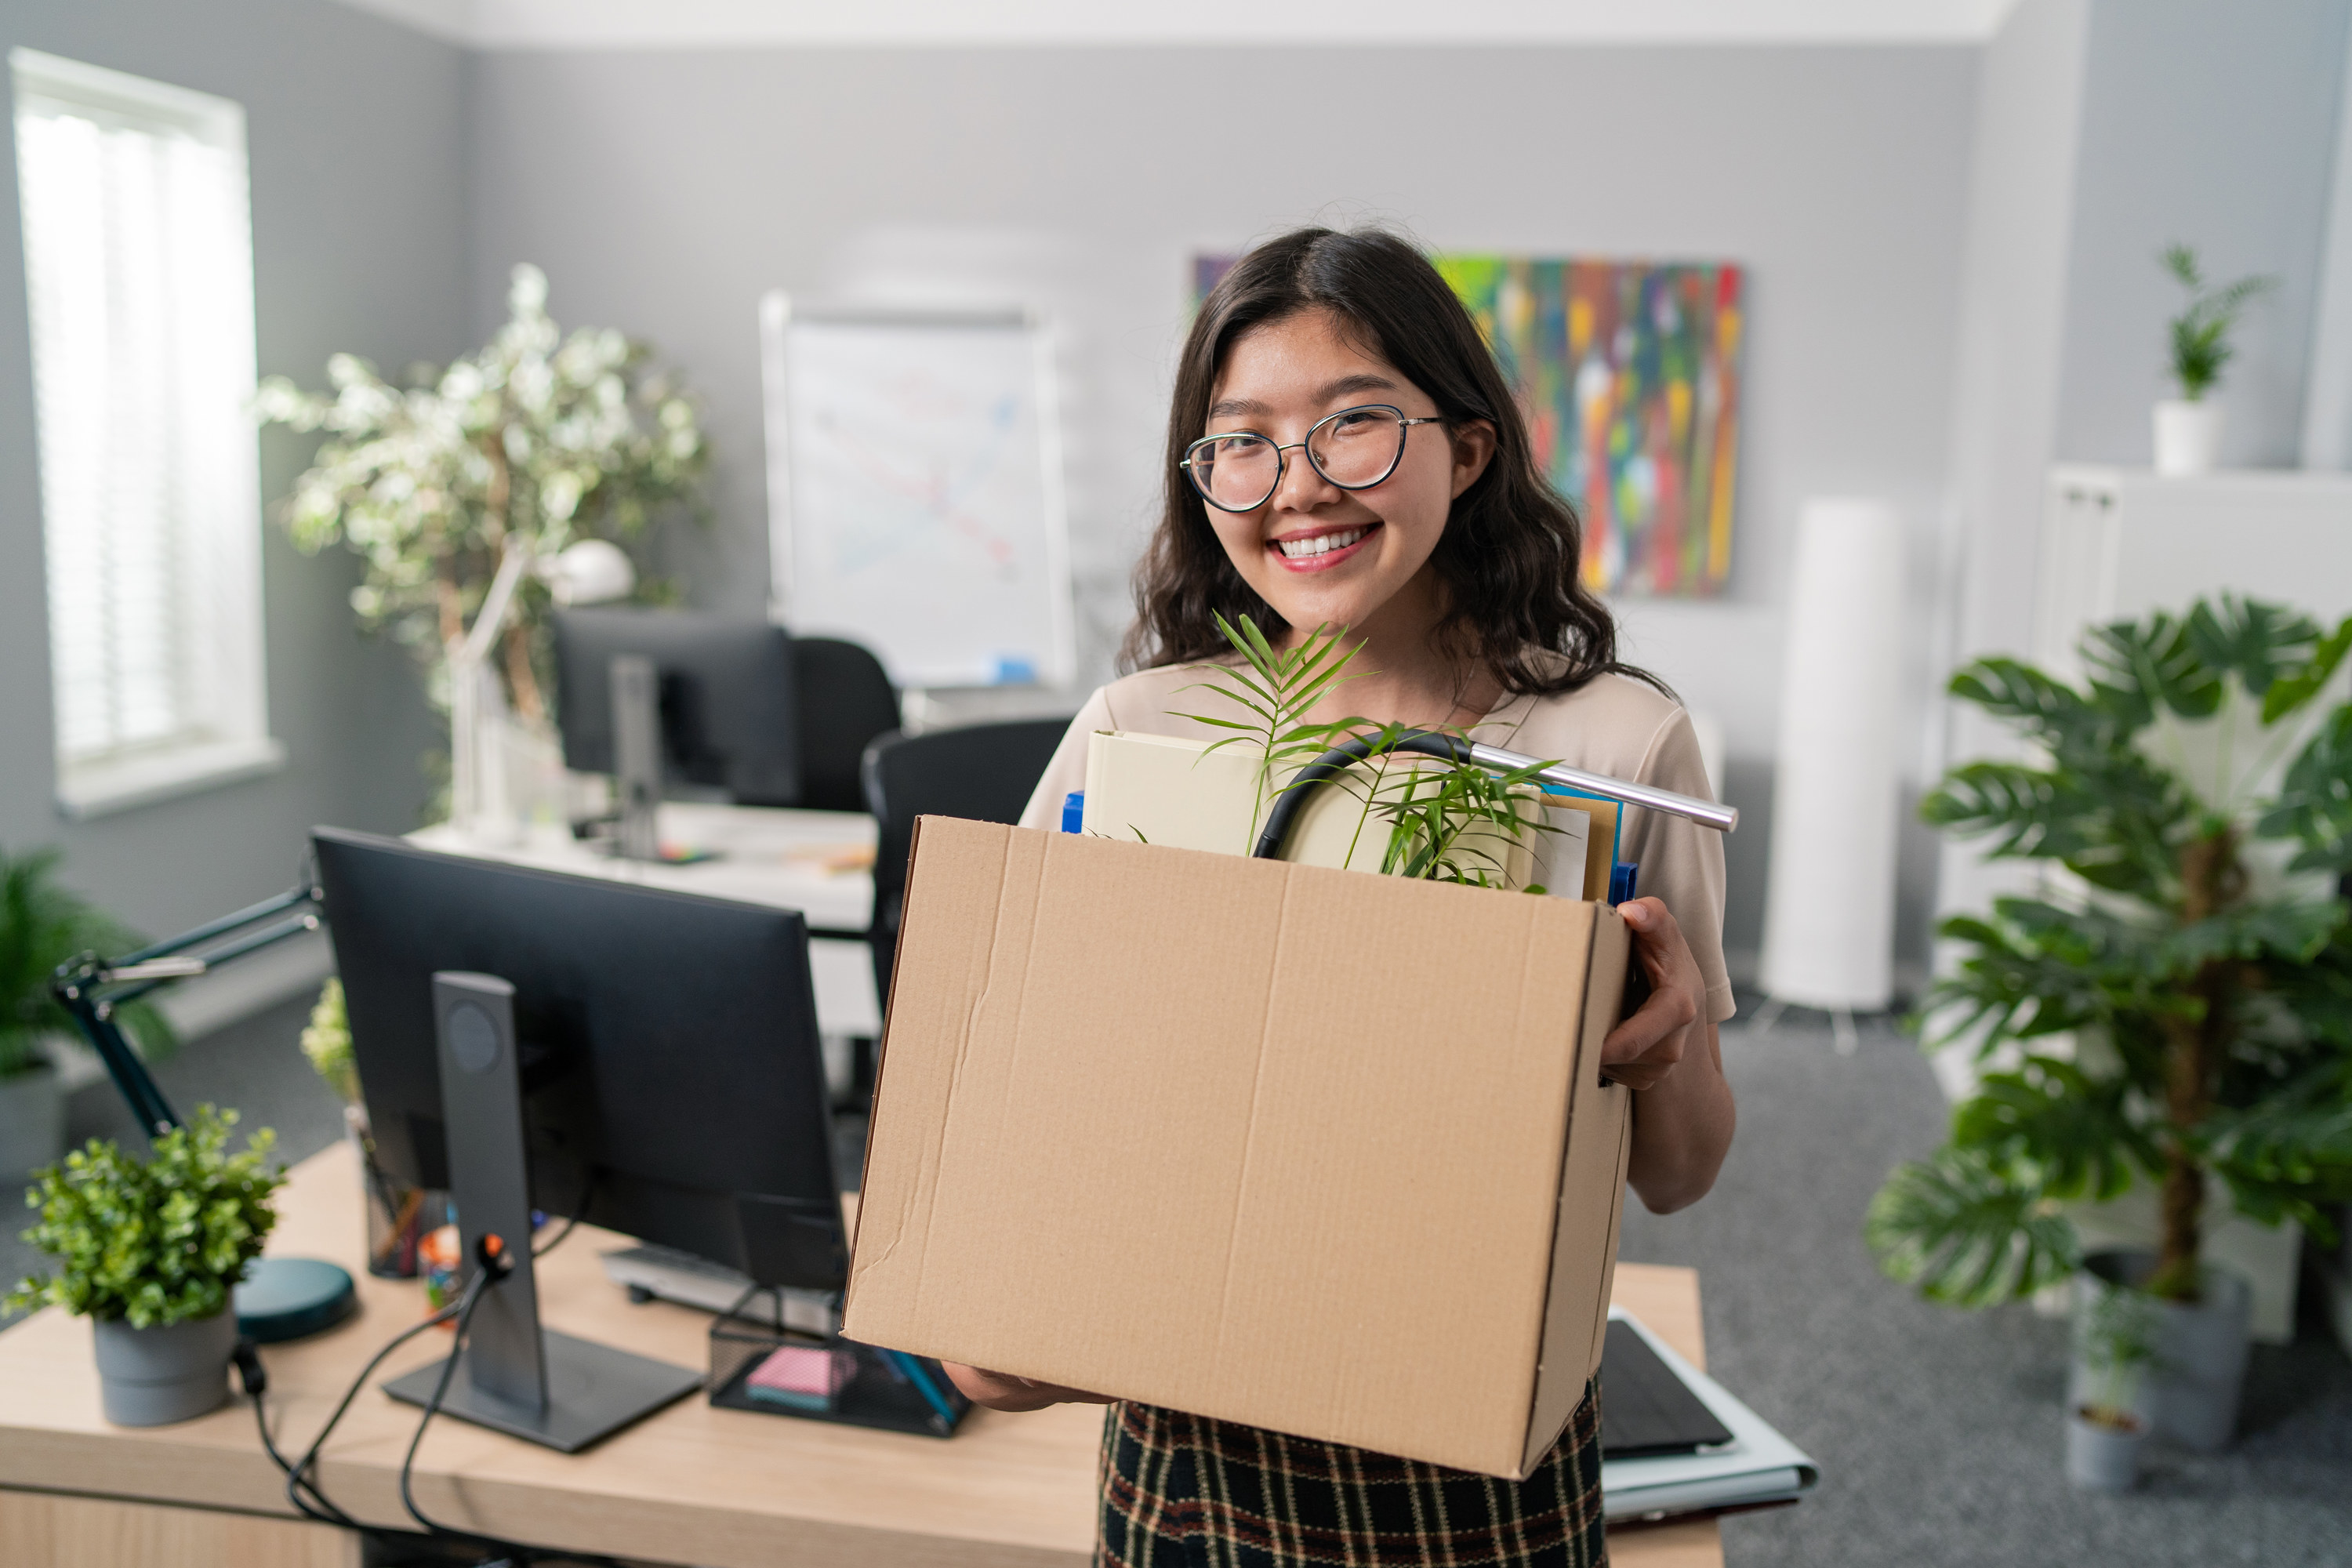 Woman smiling and carrying a box of her stuff out of an office